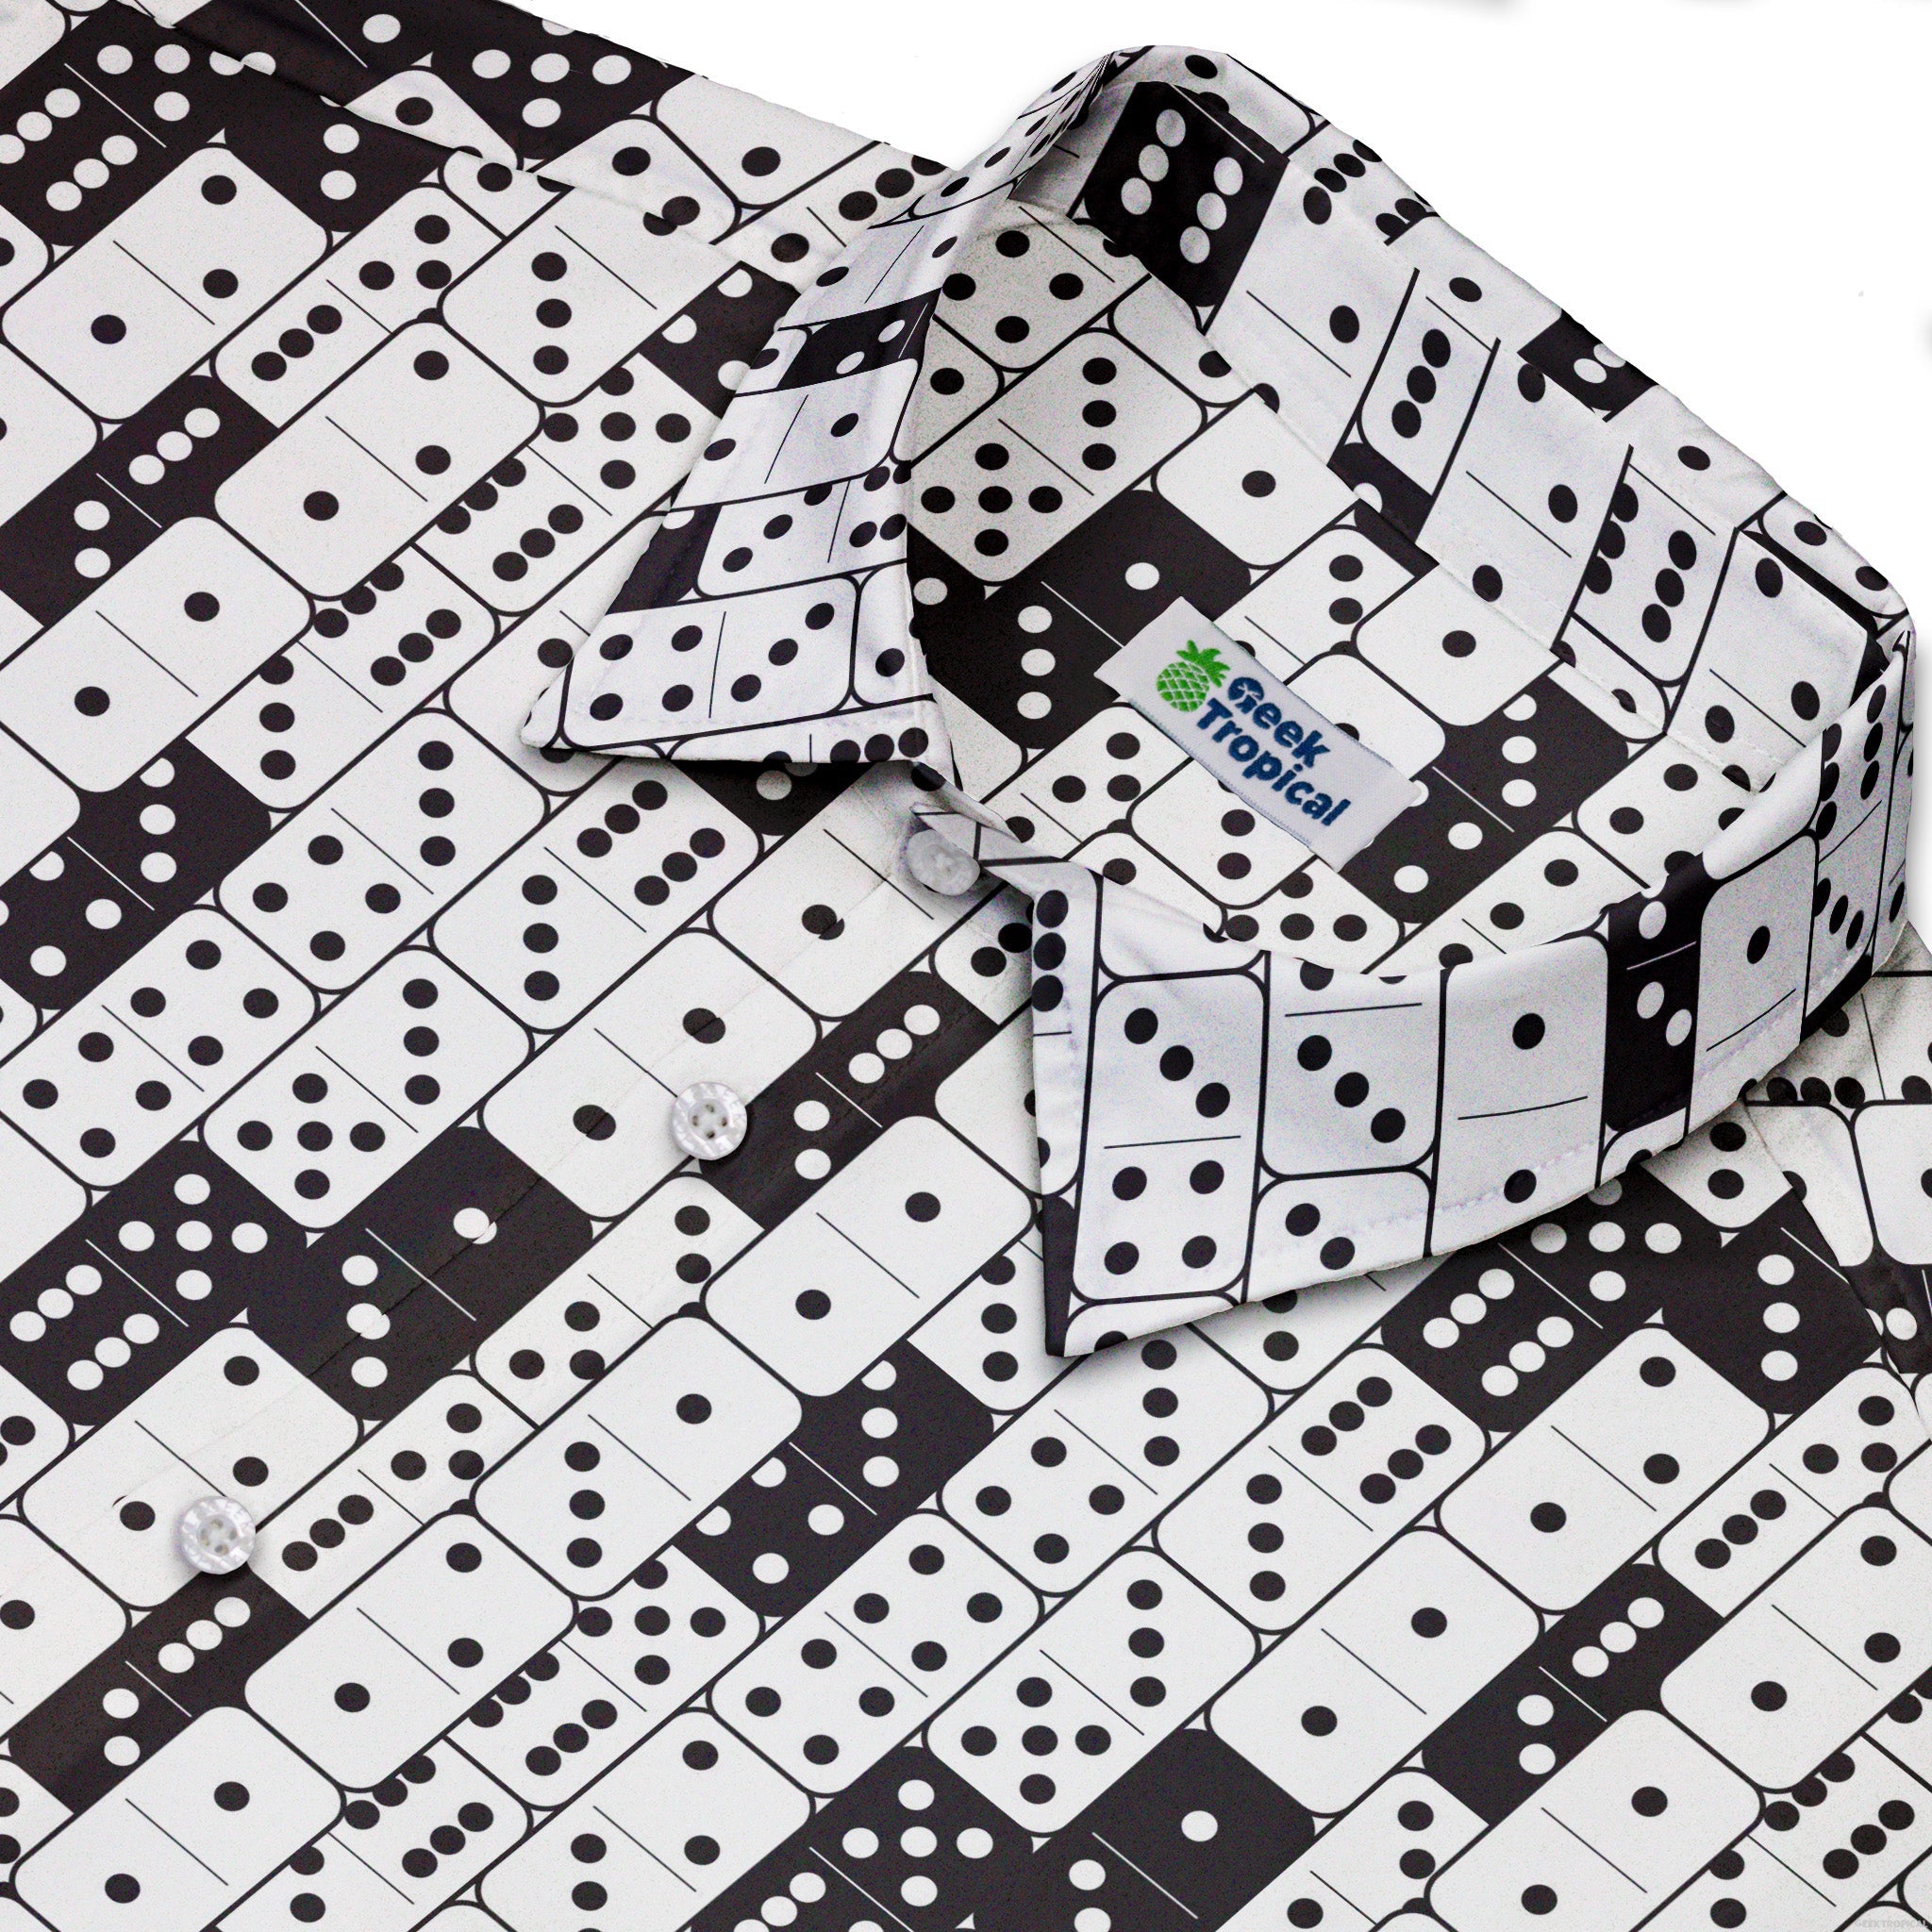 Dominos Button Up Shirt - adult sizing - board game print - Design by Heather Davenport